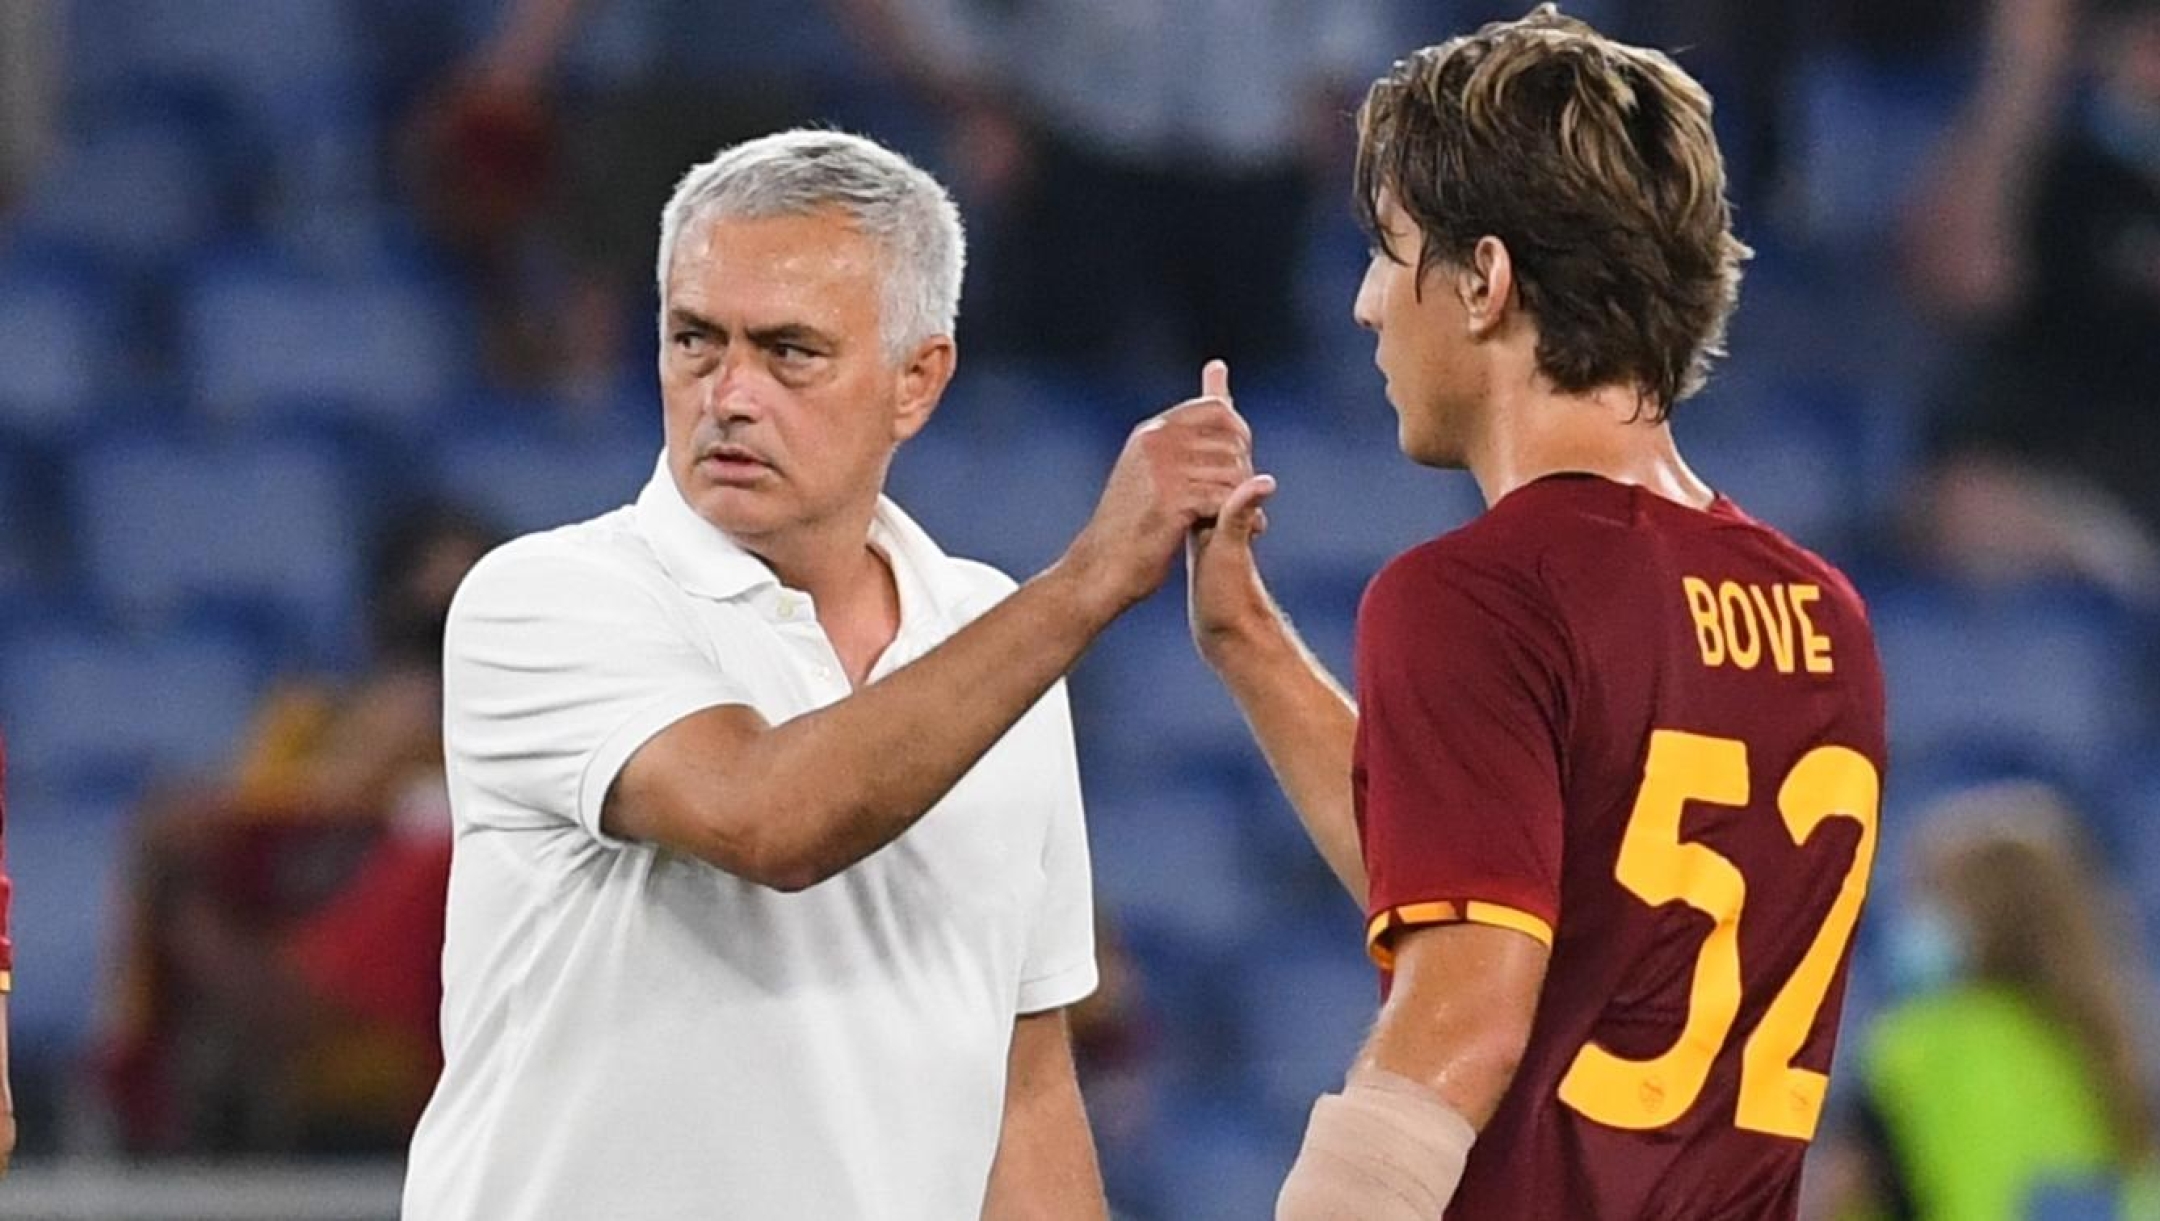 ROME, ITALY - AUGUST 22: Jose Mourinho head coach of AS Roma high-fives bar to Edoardo Bove of AS Roma during the Serie A match between AS Roma v ACF Fiorentina at Stadio Olimpico on August 22, 2021 in Rome, Italy. (Photo by Silvia Lore/Getty Images)